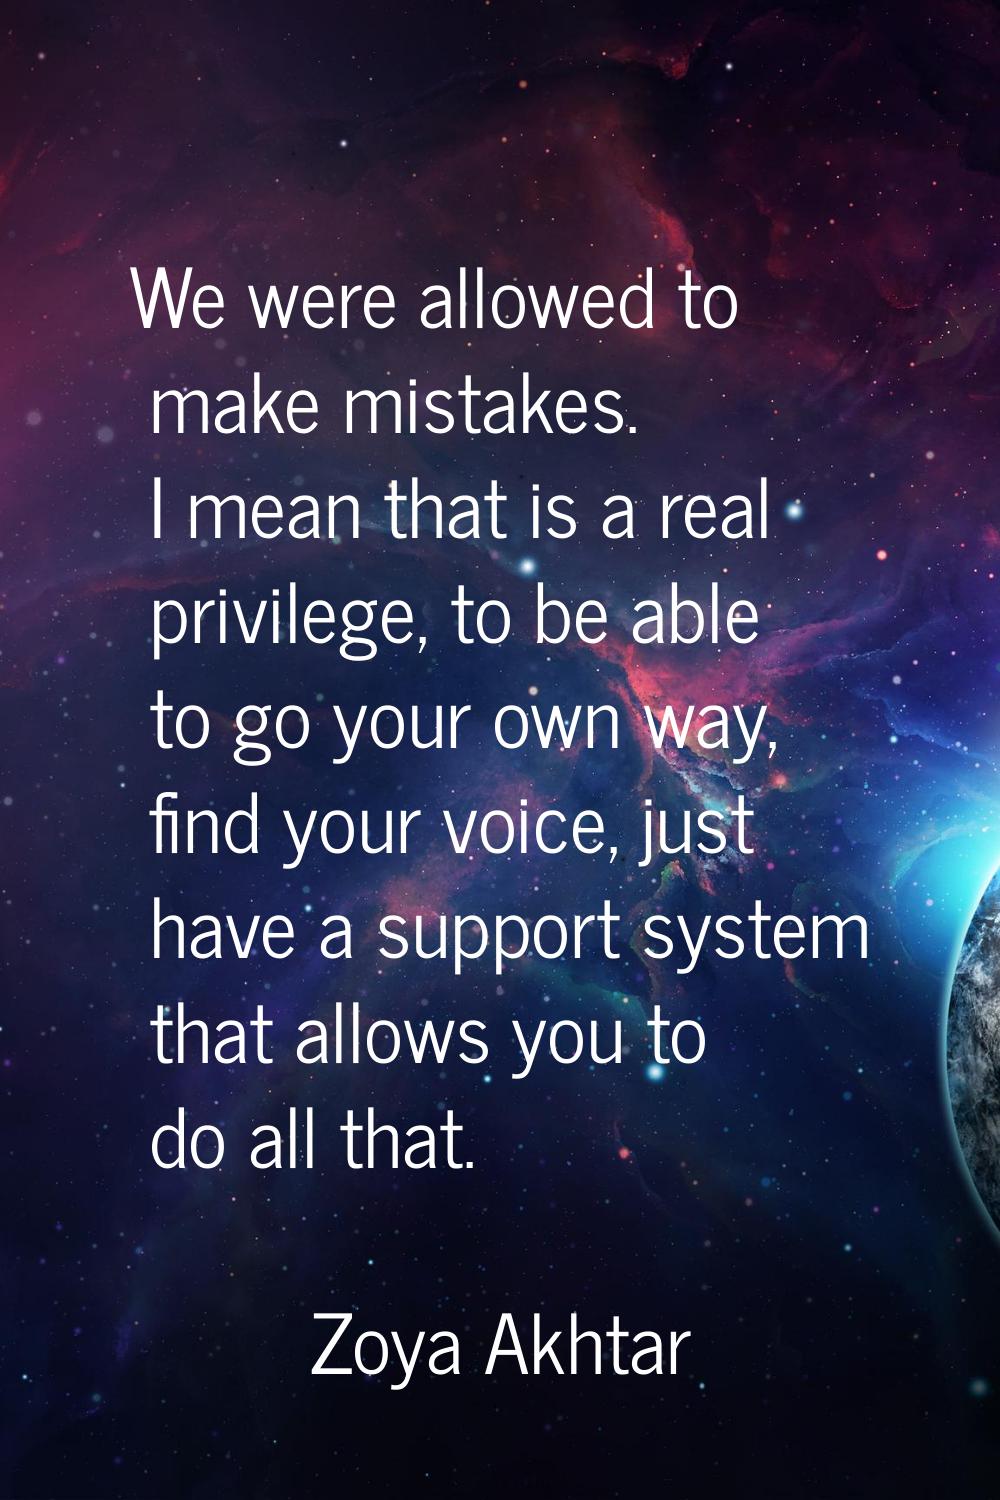 We were allowed to make mistakes. I mean that is a real privilege, to be able to go your own way, f